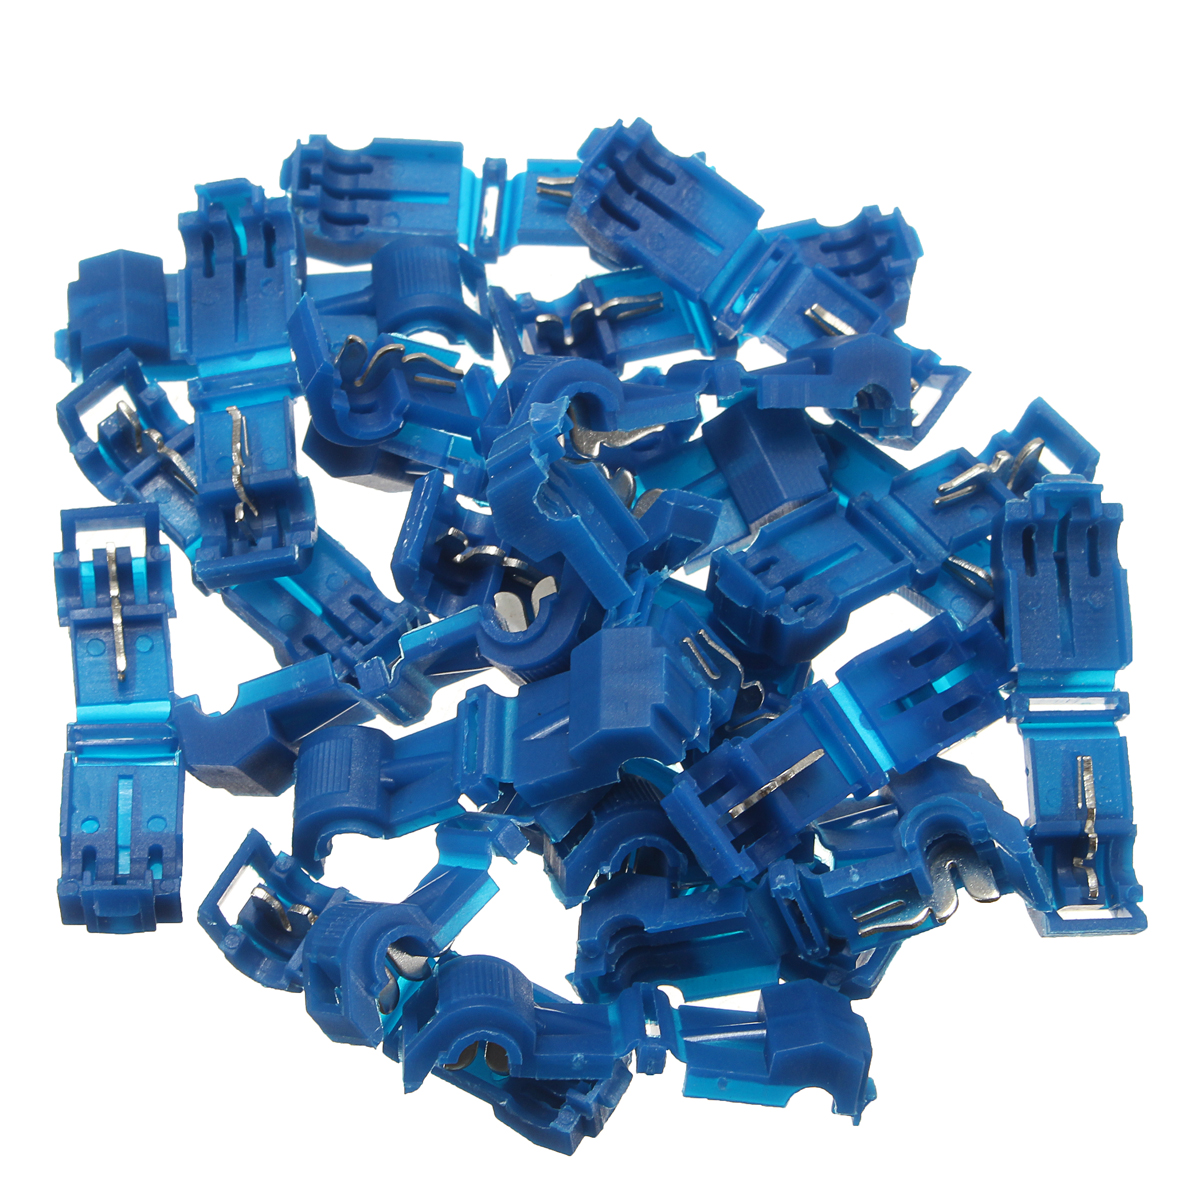 150PCS T-Taps/Male Insulated Wire Terminal Connector Combo Kit 14-16/10-12/18-22 